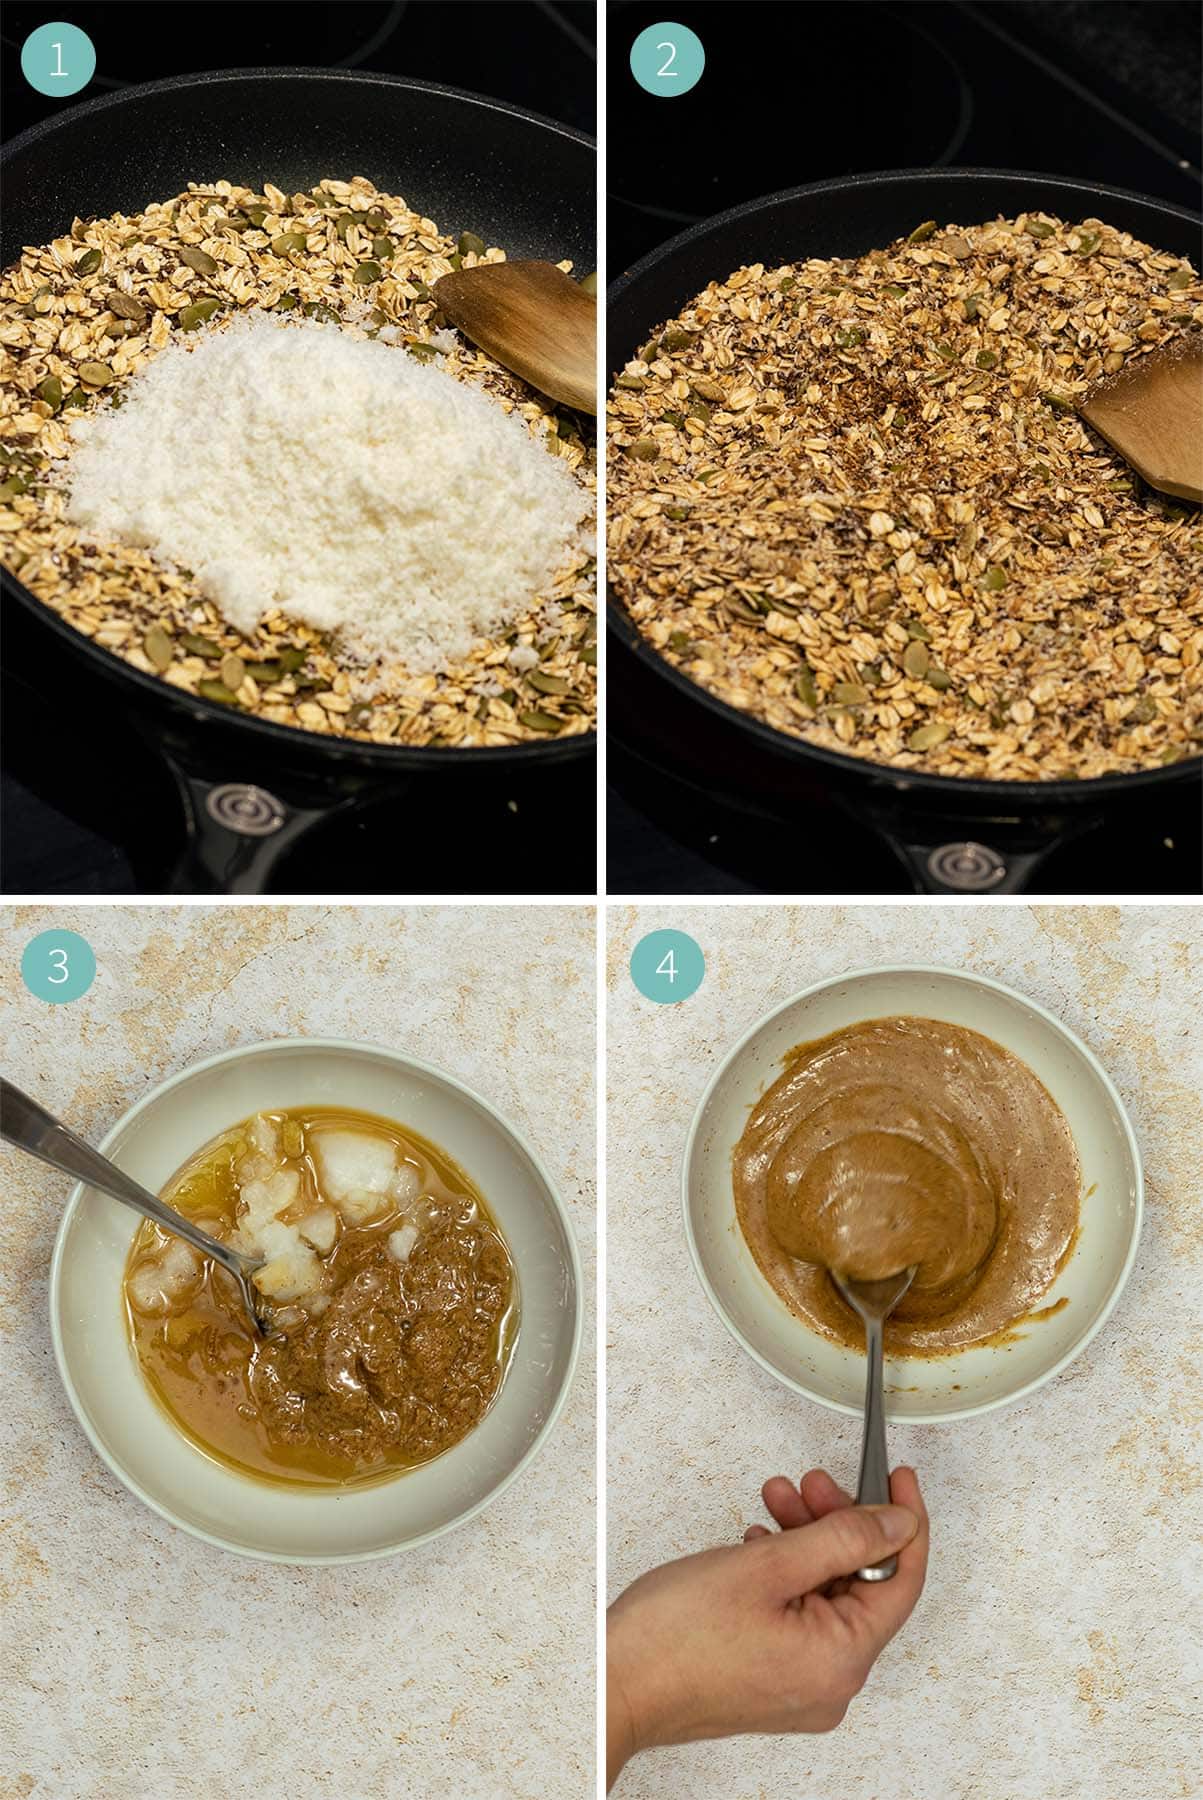 Homemade Granola Bar - Instruction Steps 1-4 in pictures